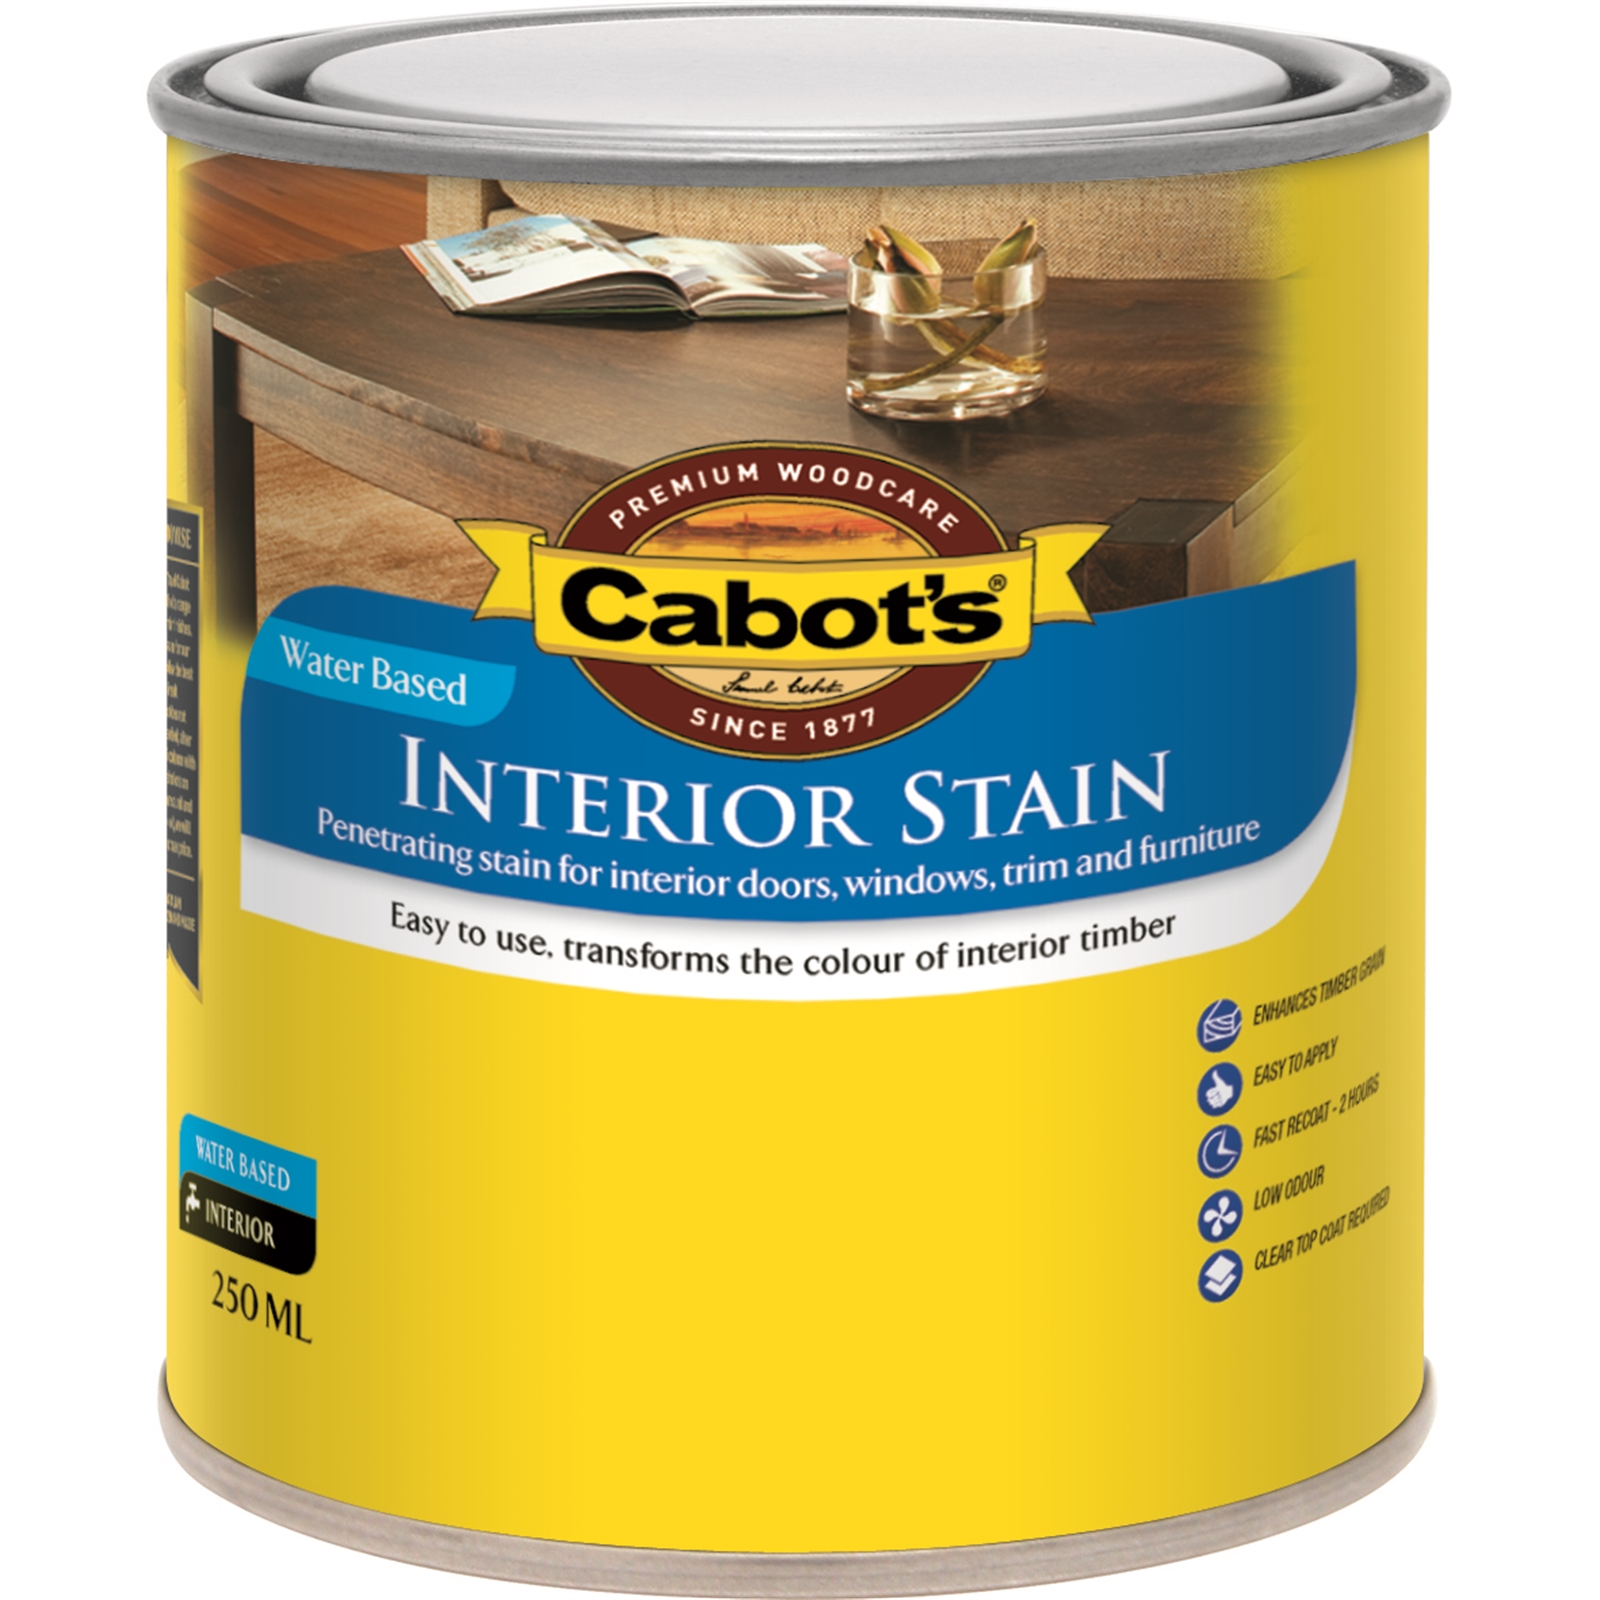 Cabot's 250ml Walnut Water Based Interior Stain